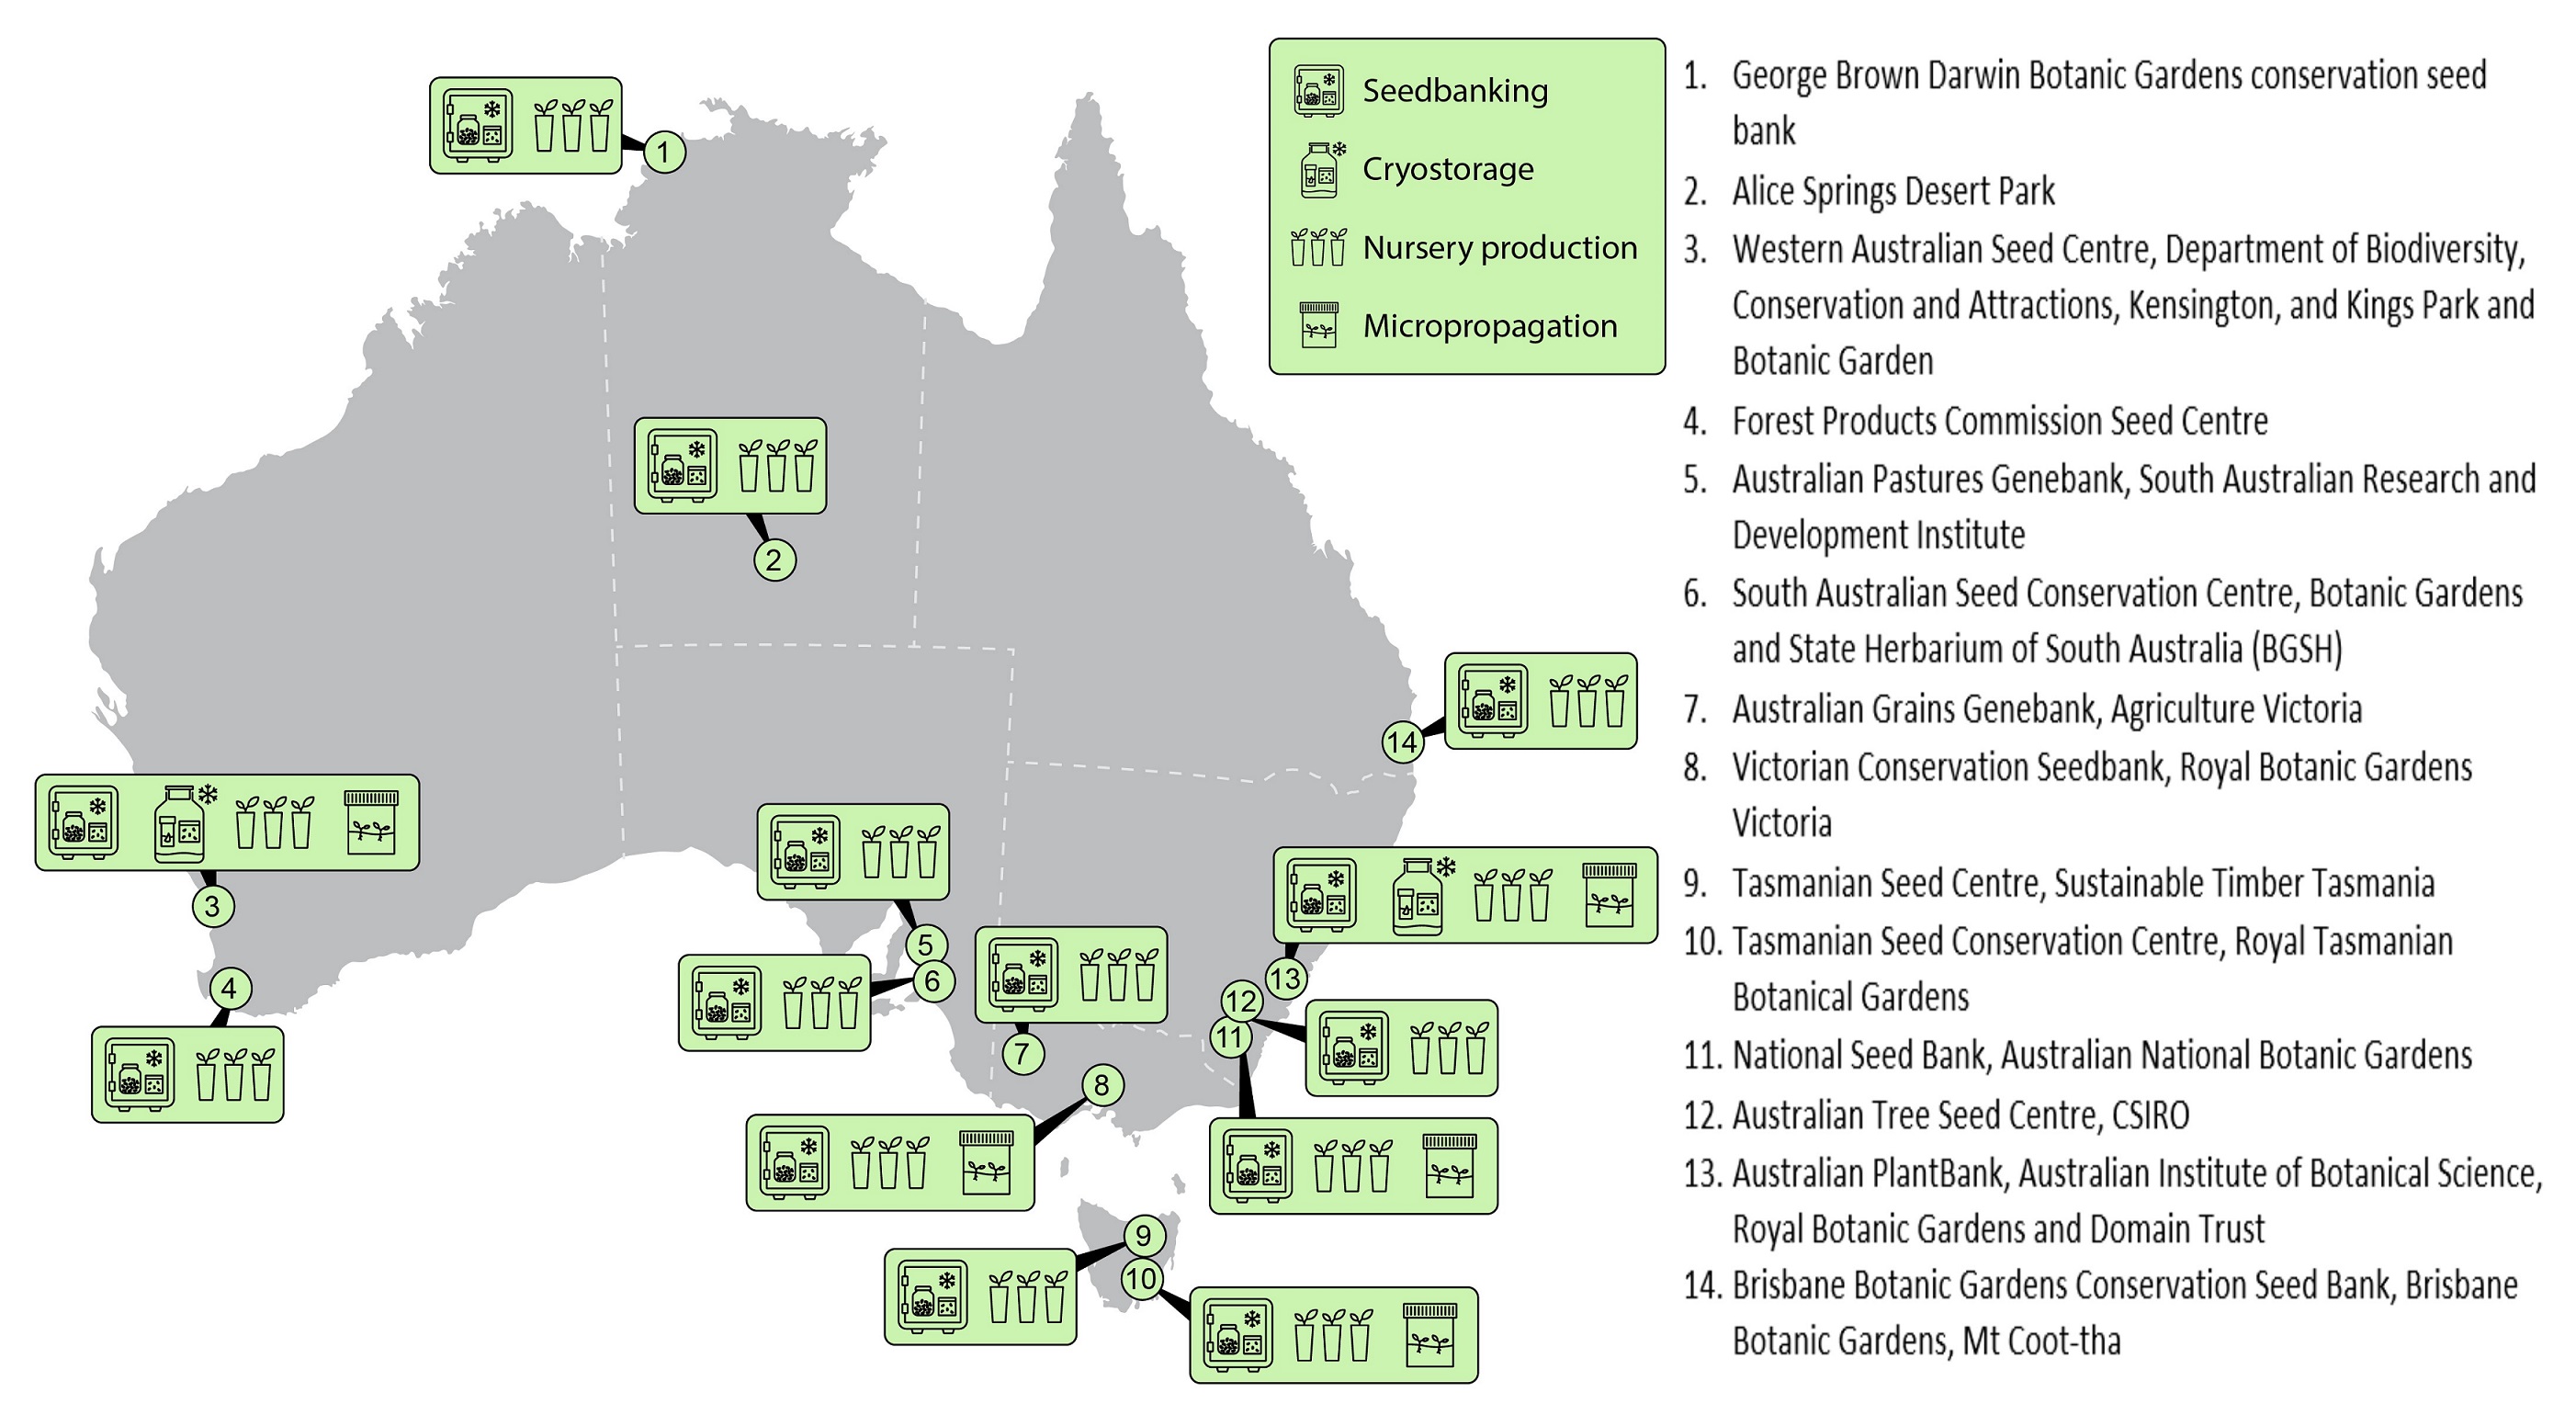 A map of Australia split into the different states indicating the location and facilities of the major Australian flora conservation centres.